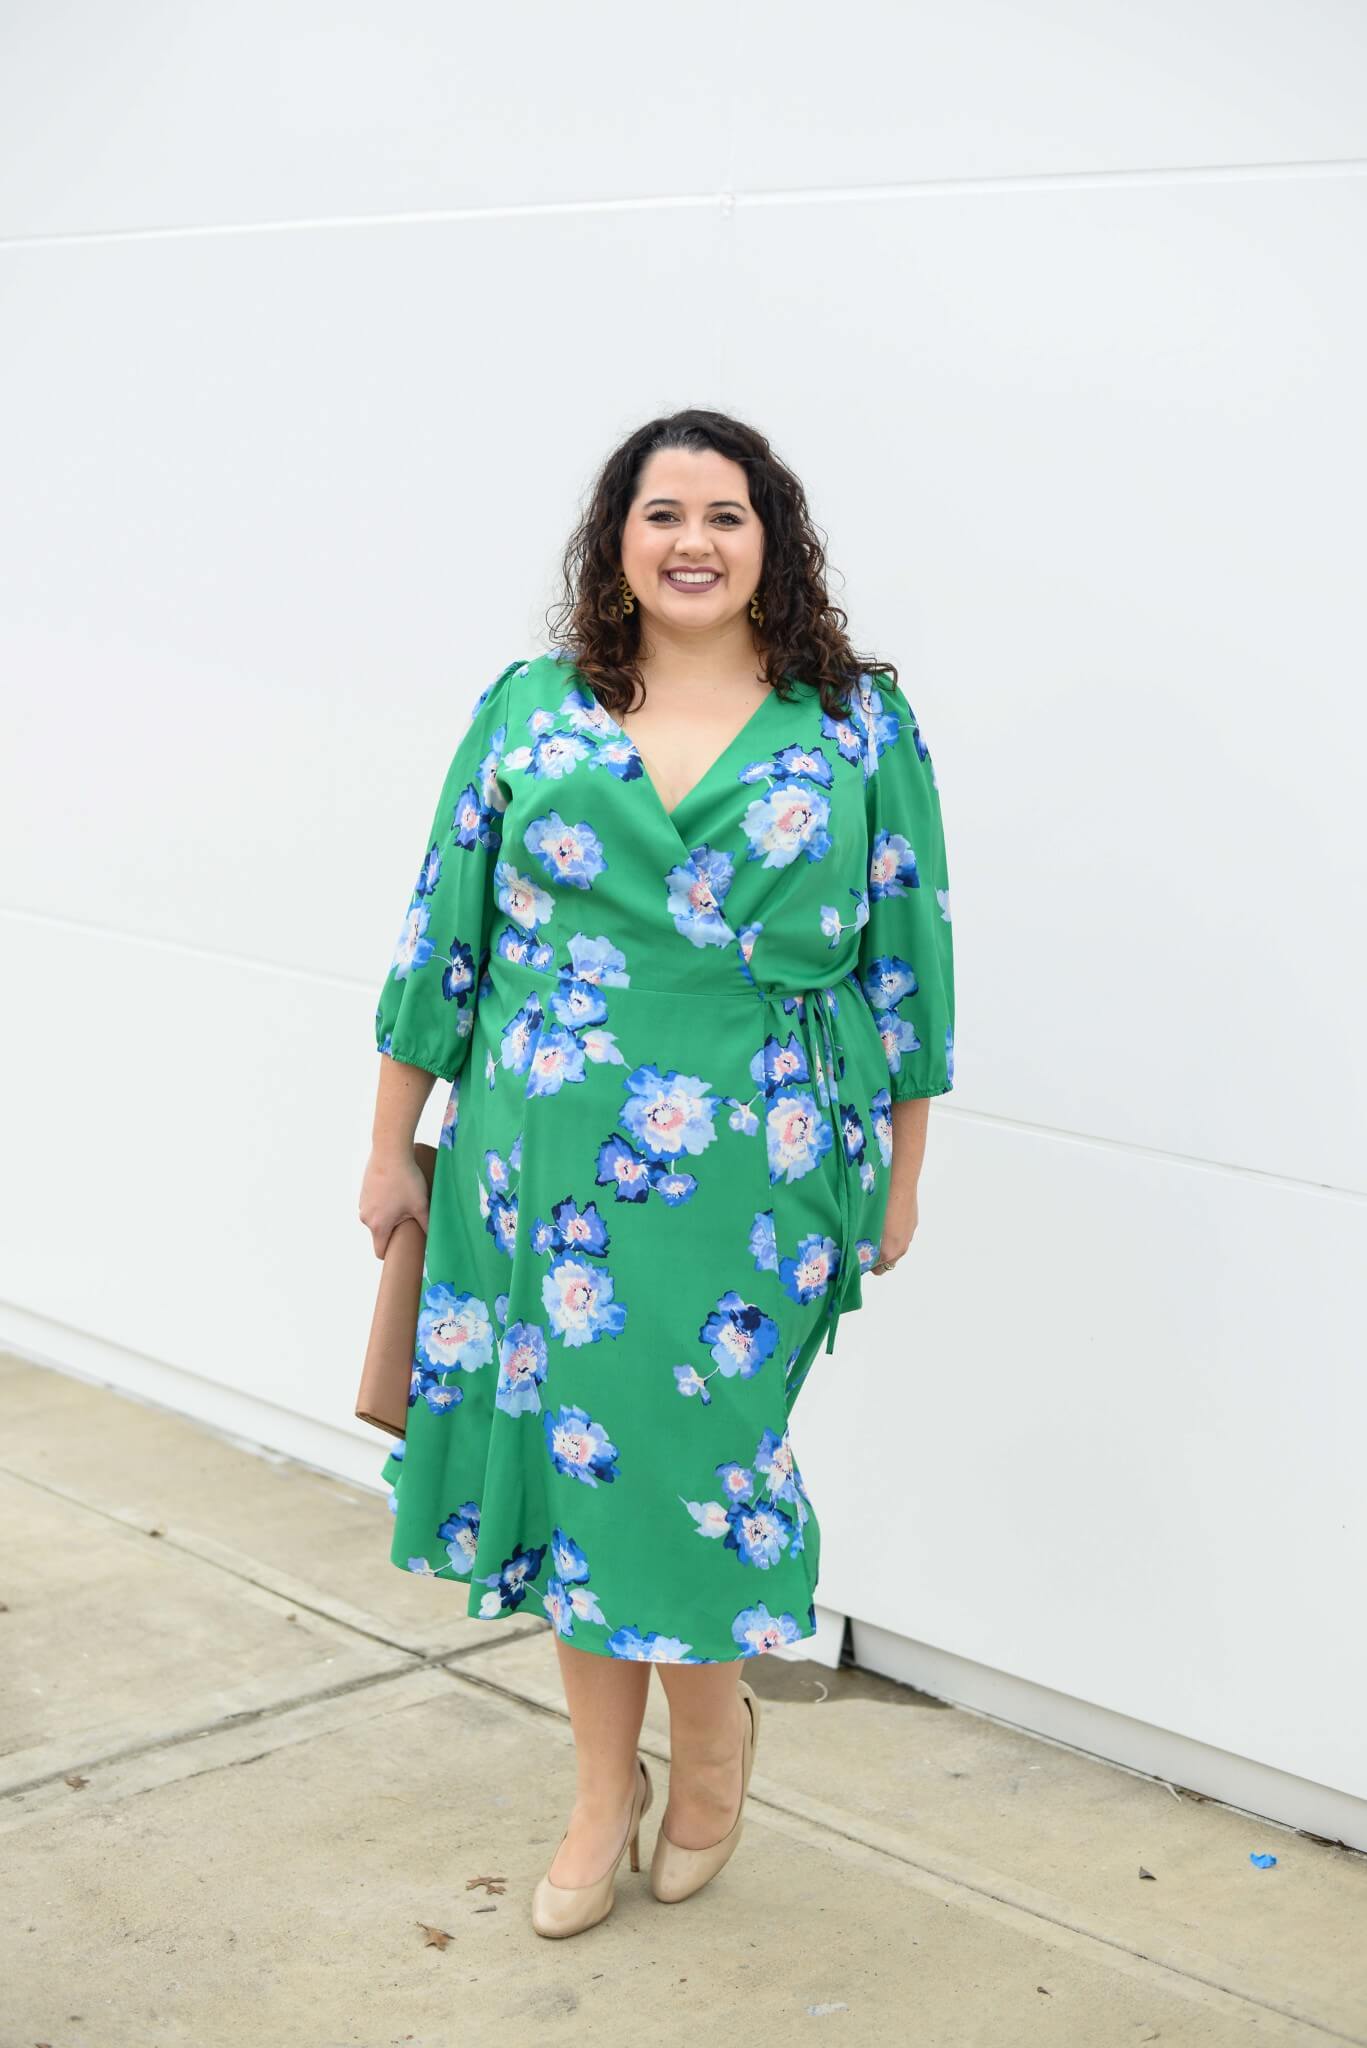 Spring has sprung and this green floral dress from Eliza J makes the prefect statement. 